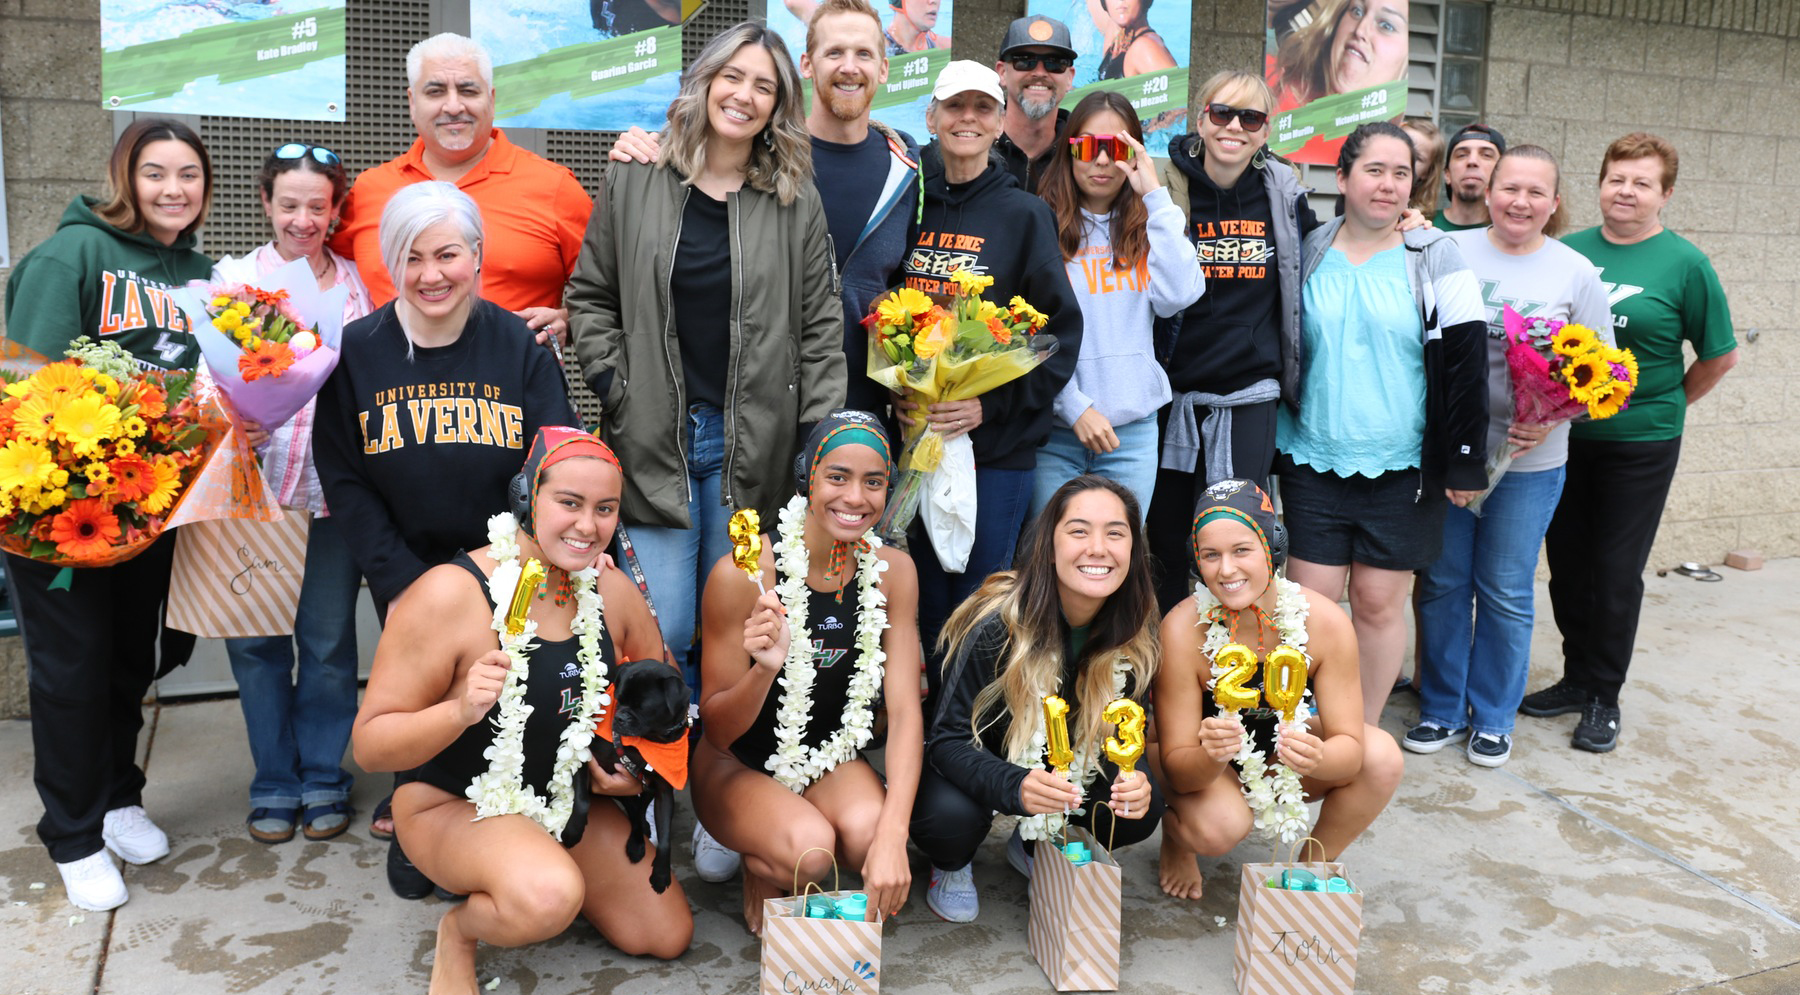 Leopards beat Oxy, claim No. 4 seed in SCIAC Tournament